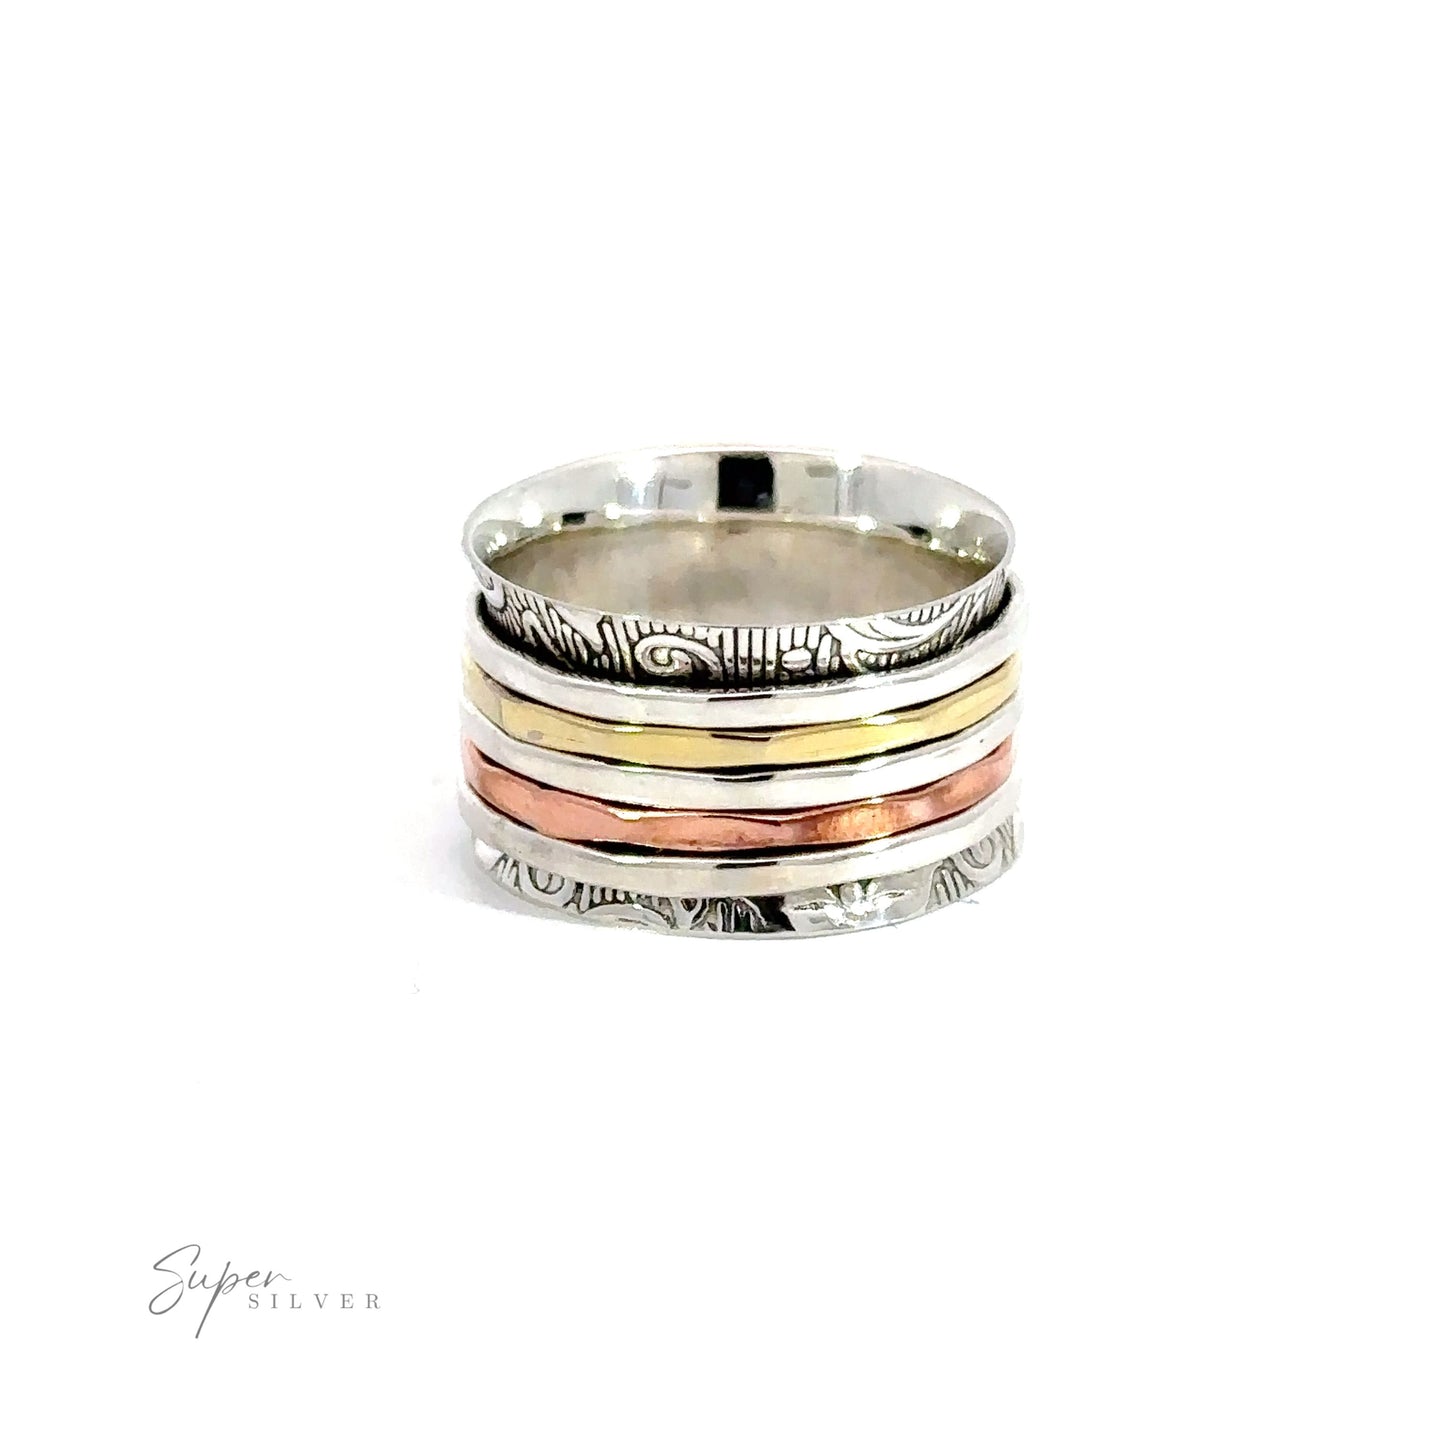 A Handmade Tricolor Etched Spinner Ring in silver and gold with three different designs.